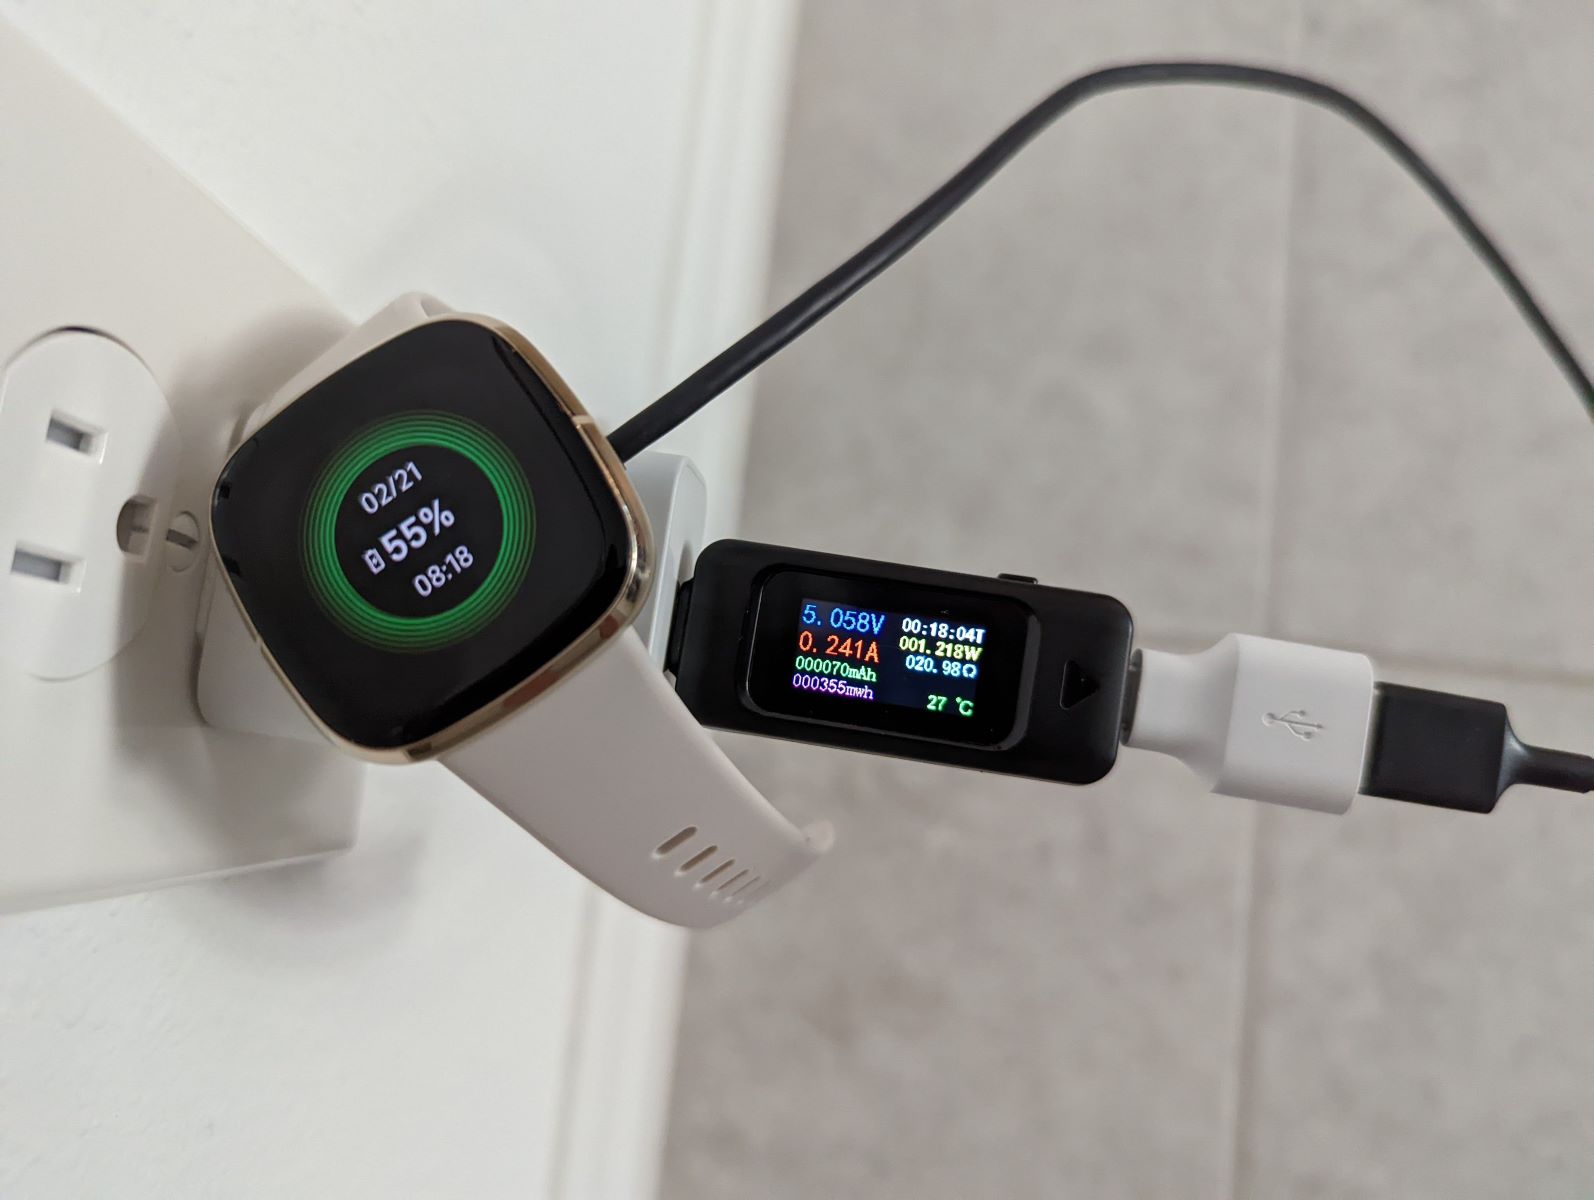 Why Shouldn’t You Plug The Fitbit Versa Charger Into A USB Hub